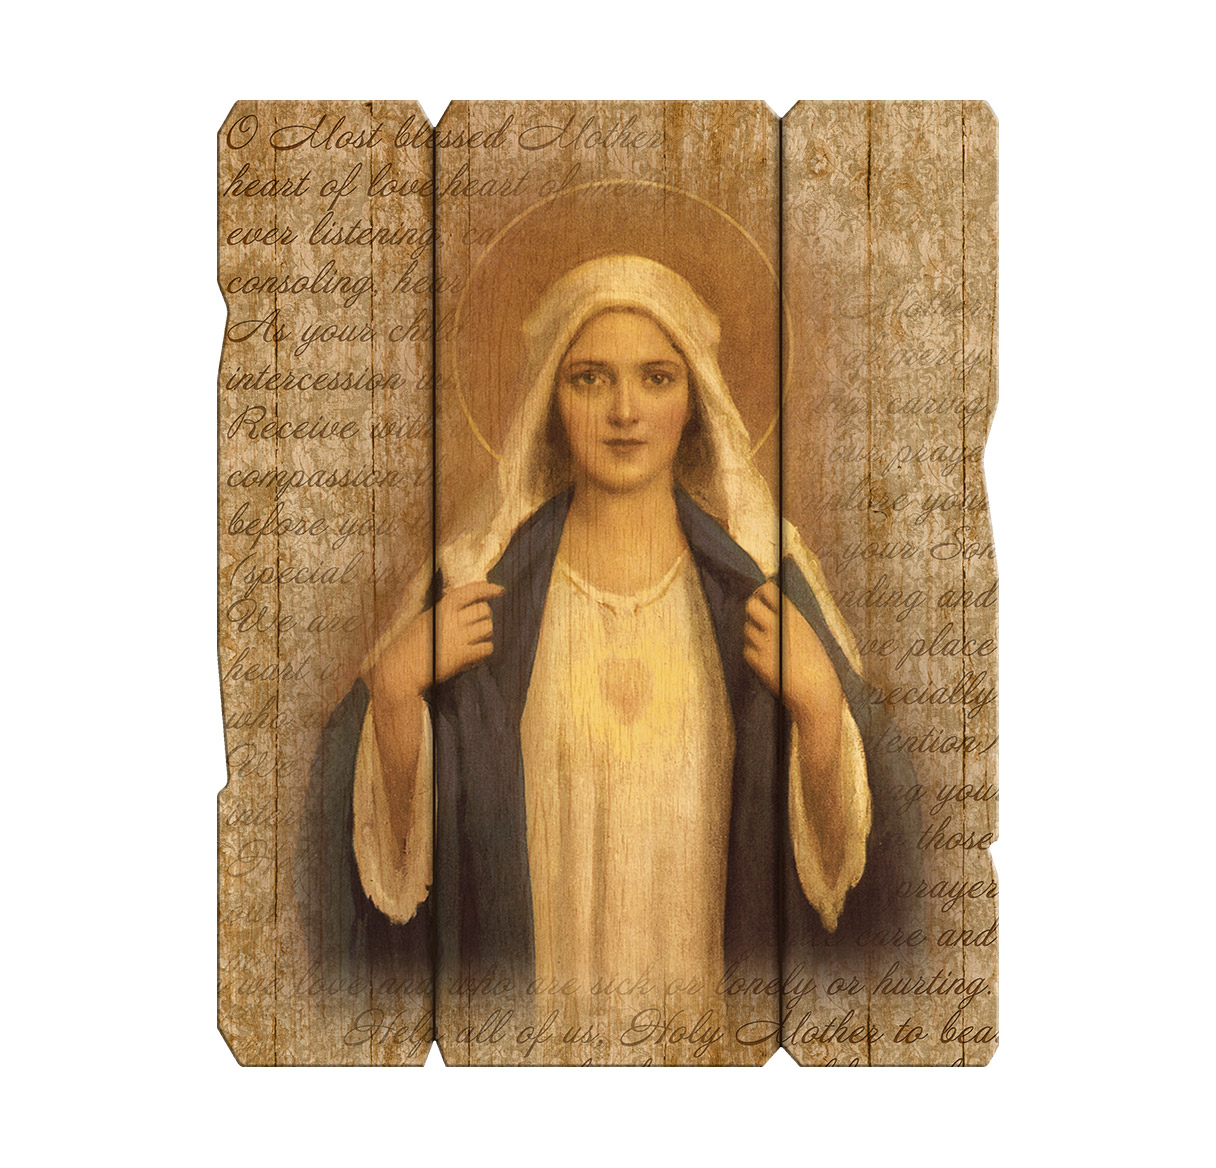 Plaque Immaculate Heart of Mary 11.25 x 14 inch Wood